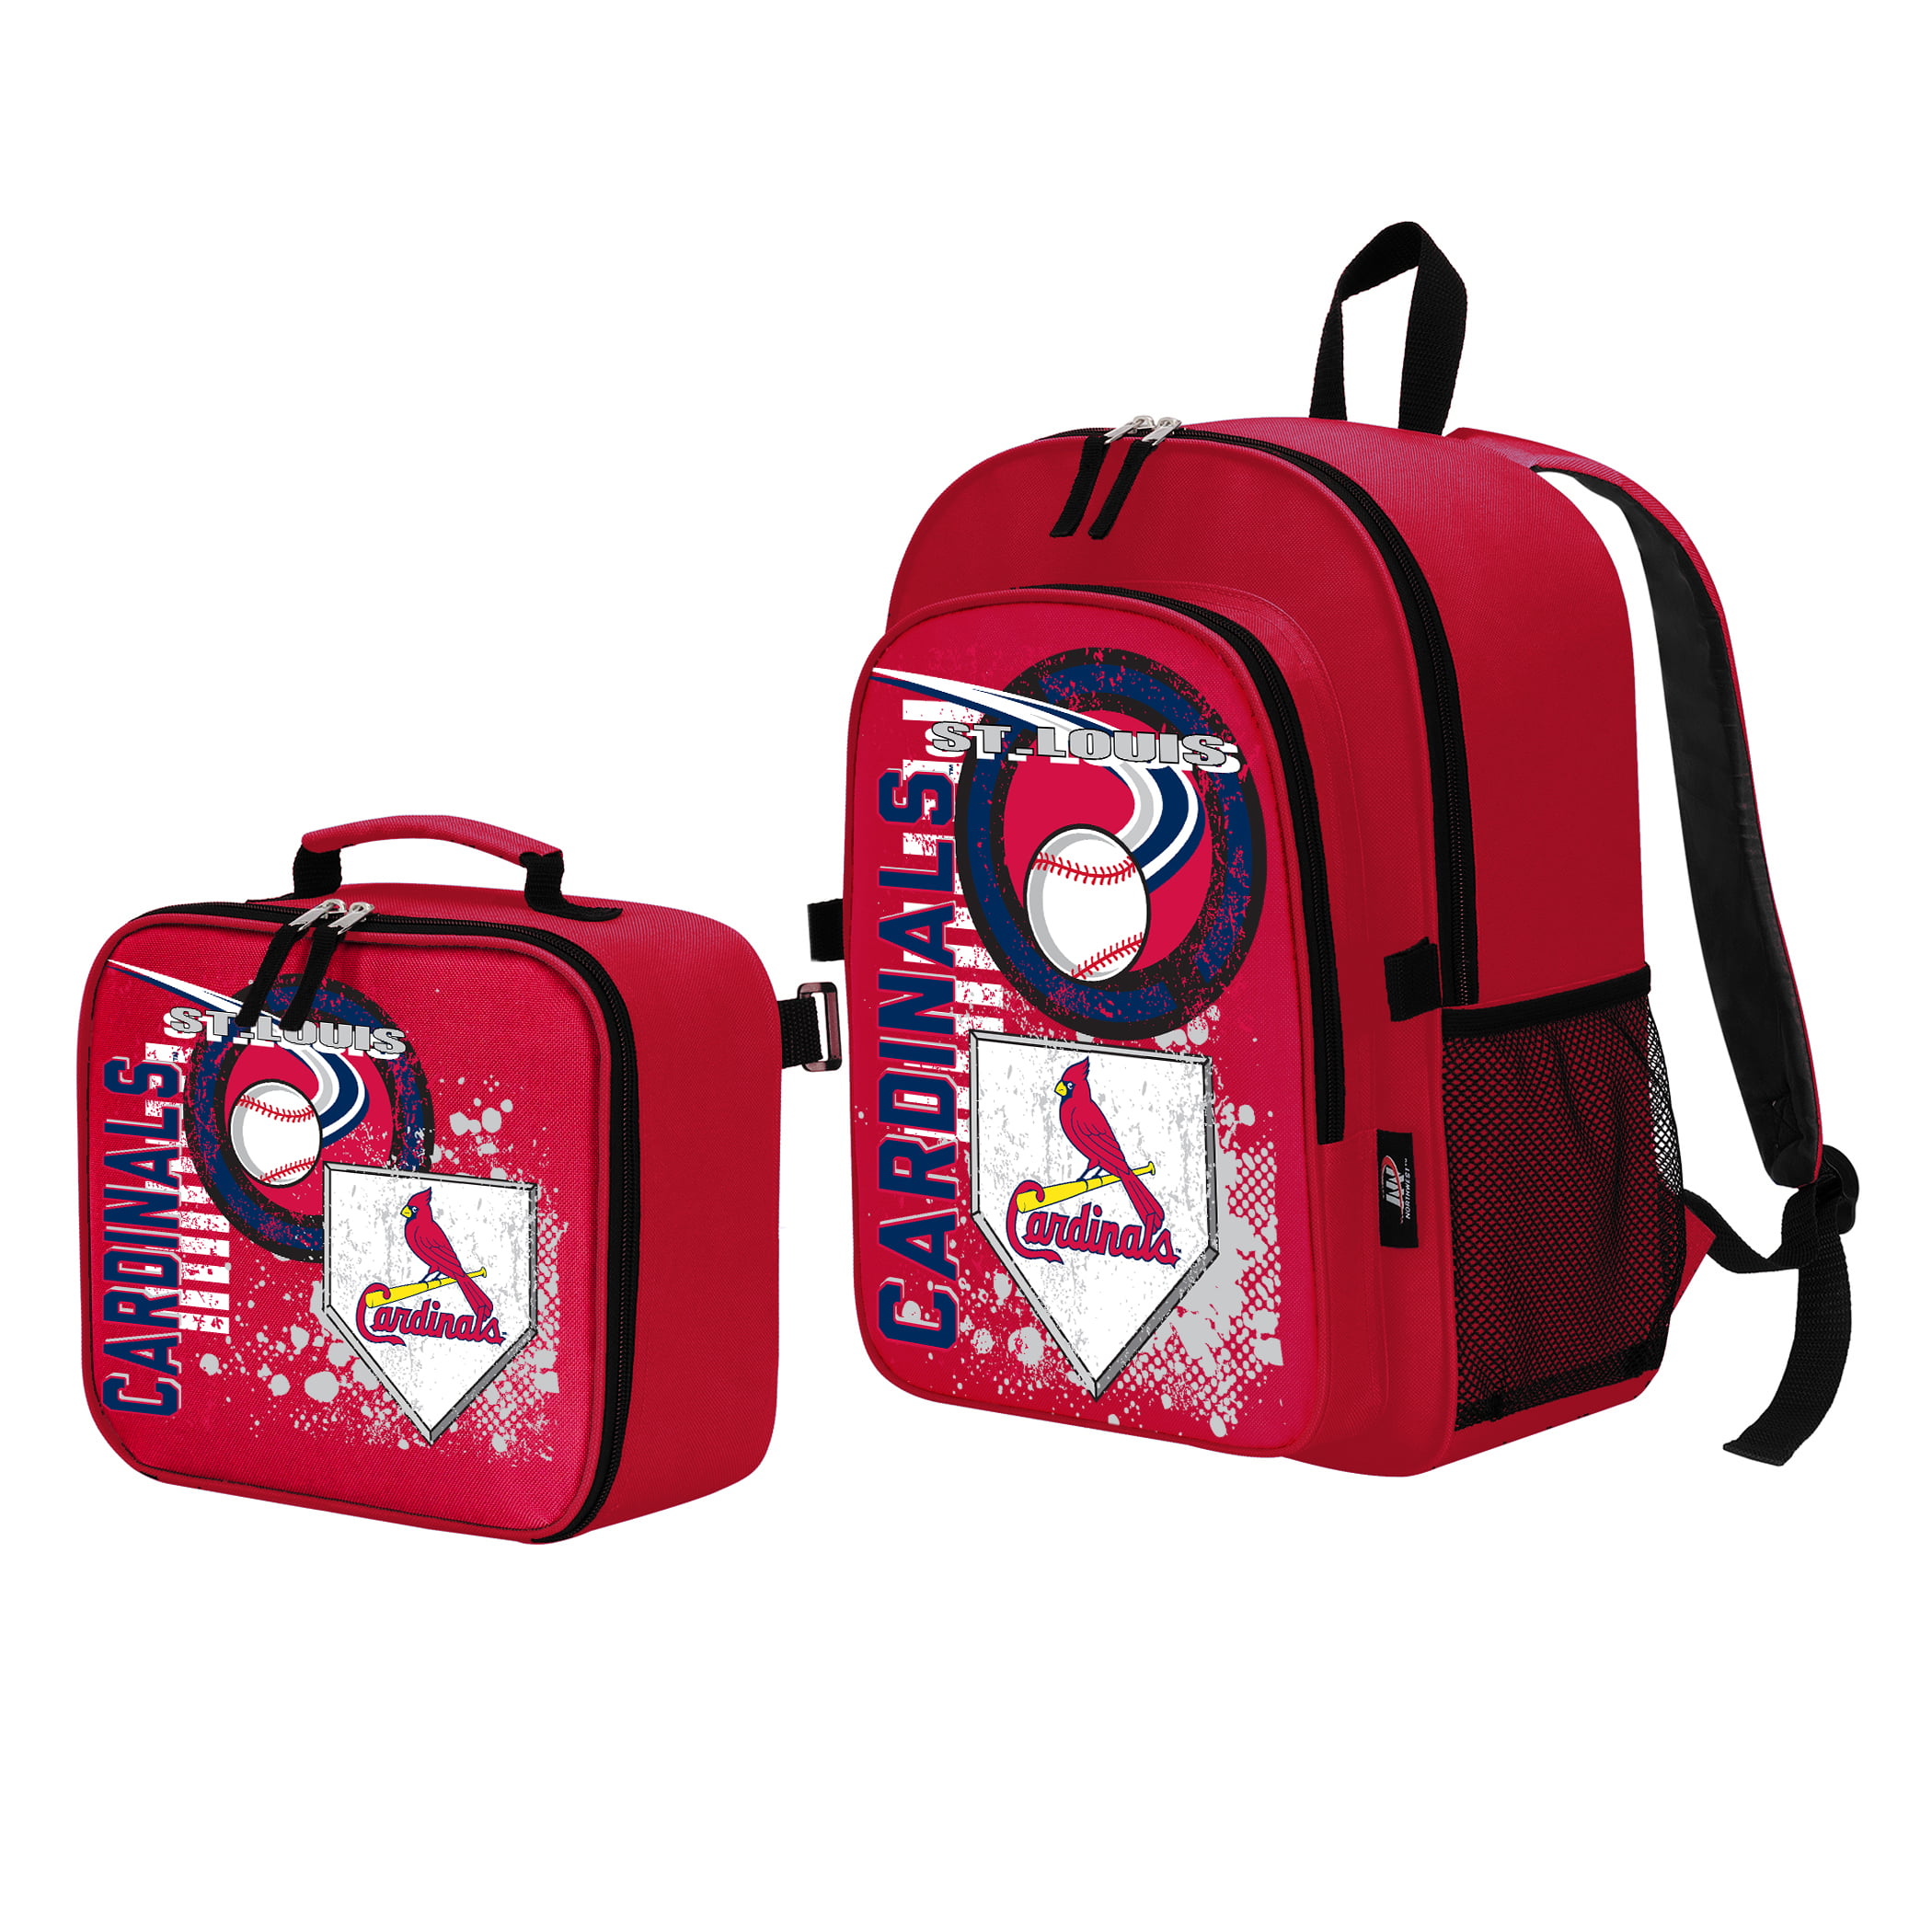 MLB St. Louis Cardinals Accelerator Backpack and Lunch Kit Set